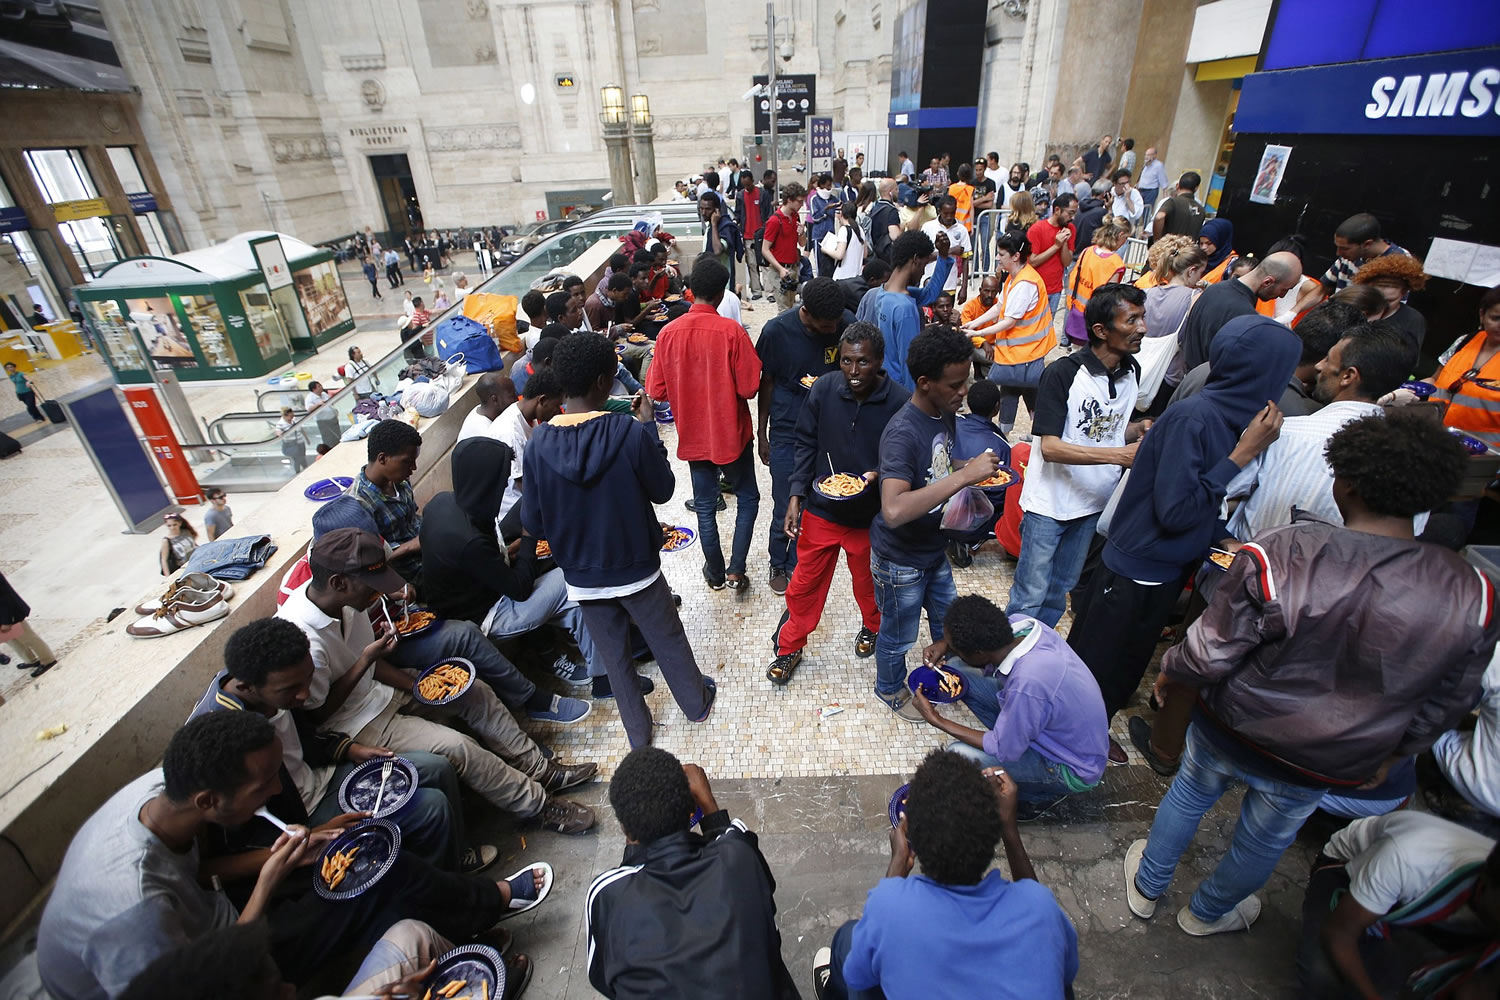 Migrants eat in the Central railway station Thursday in Milan, Italy.